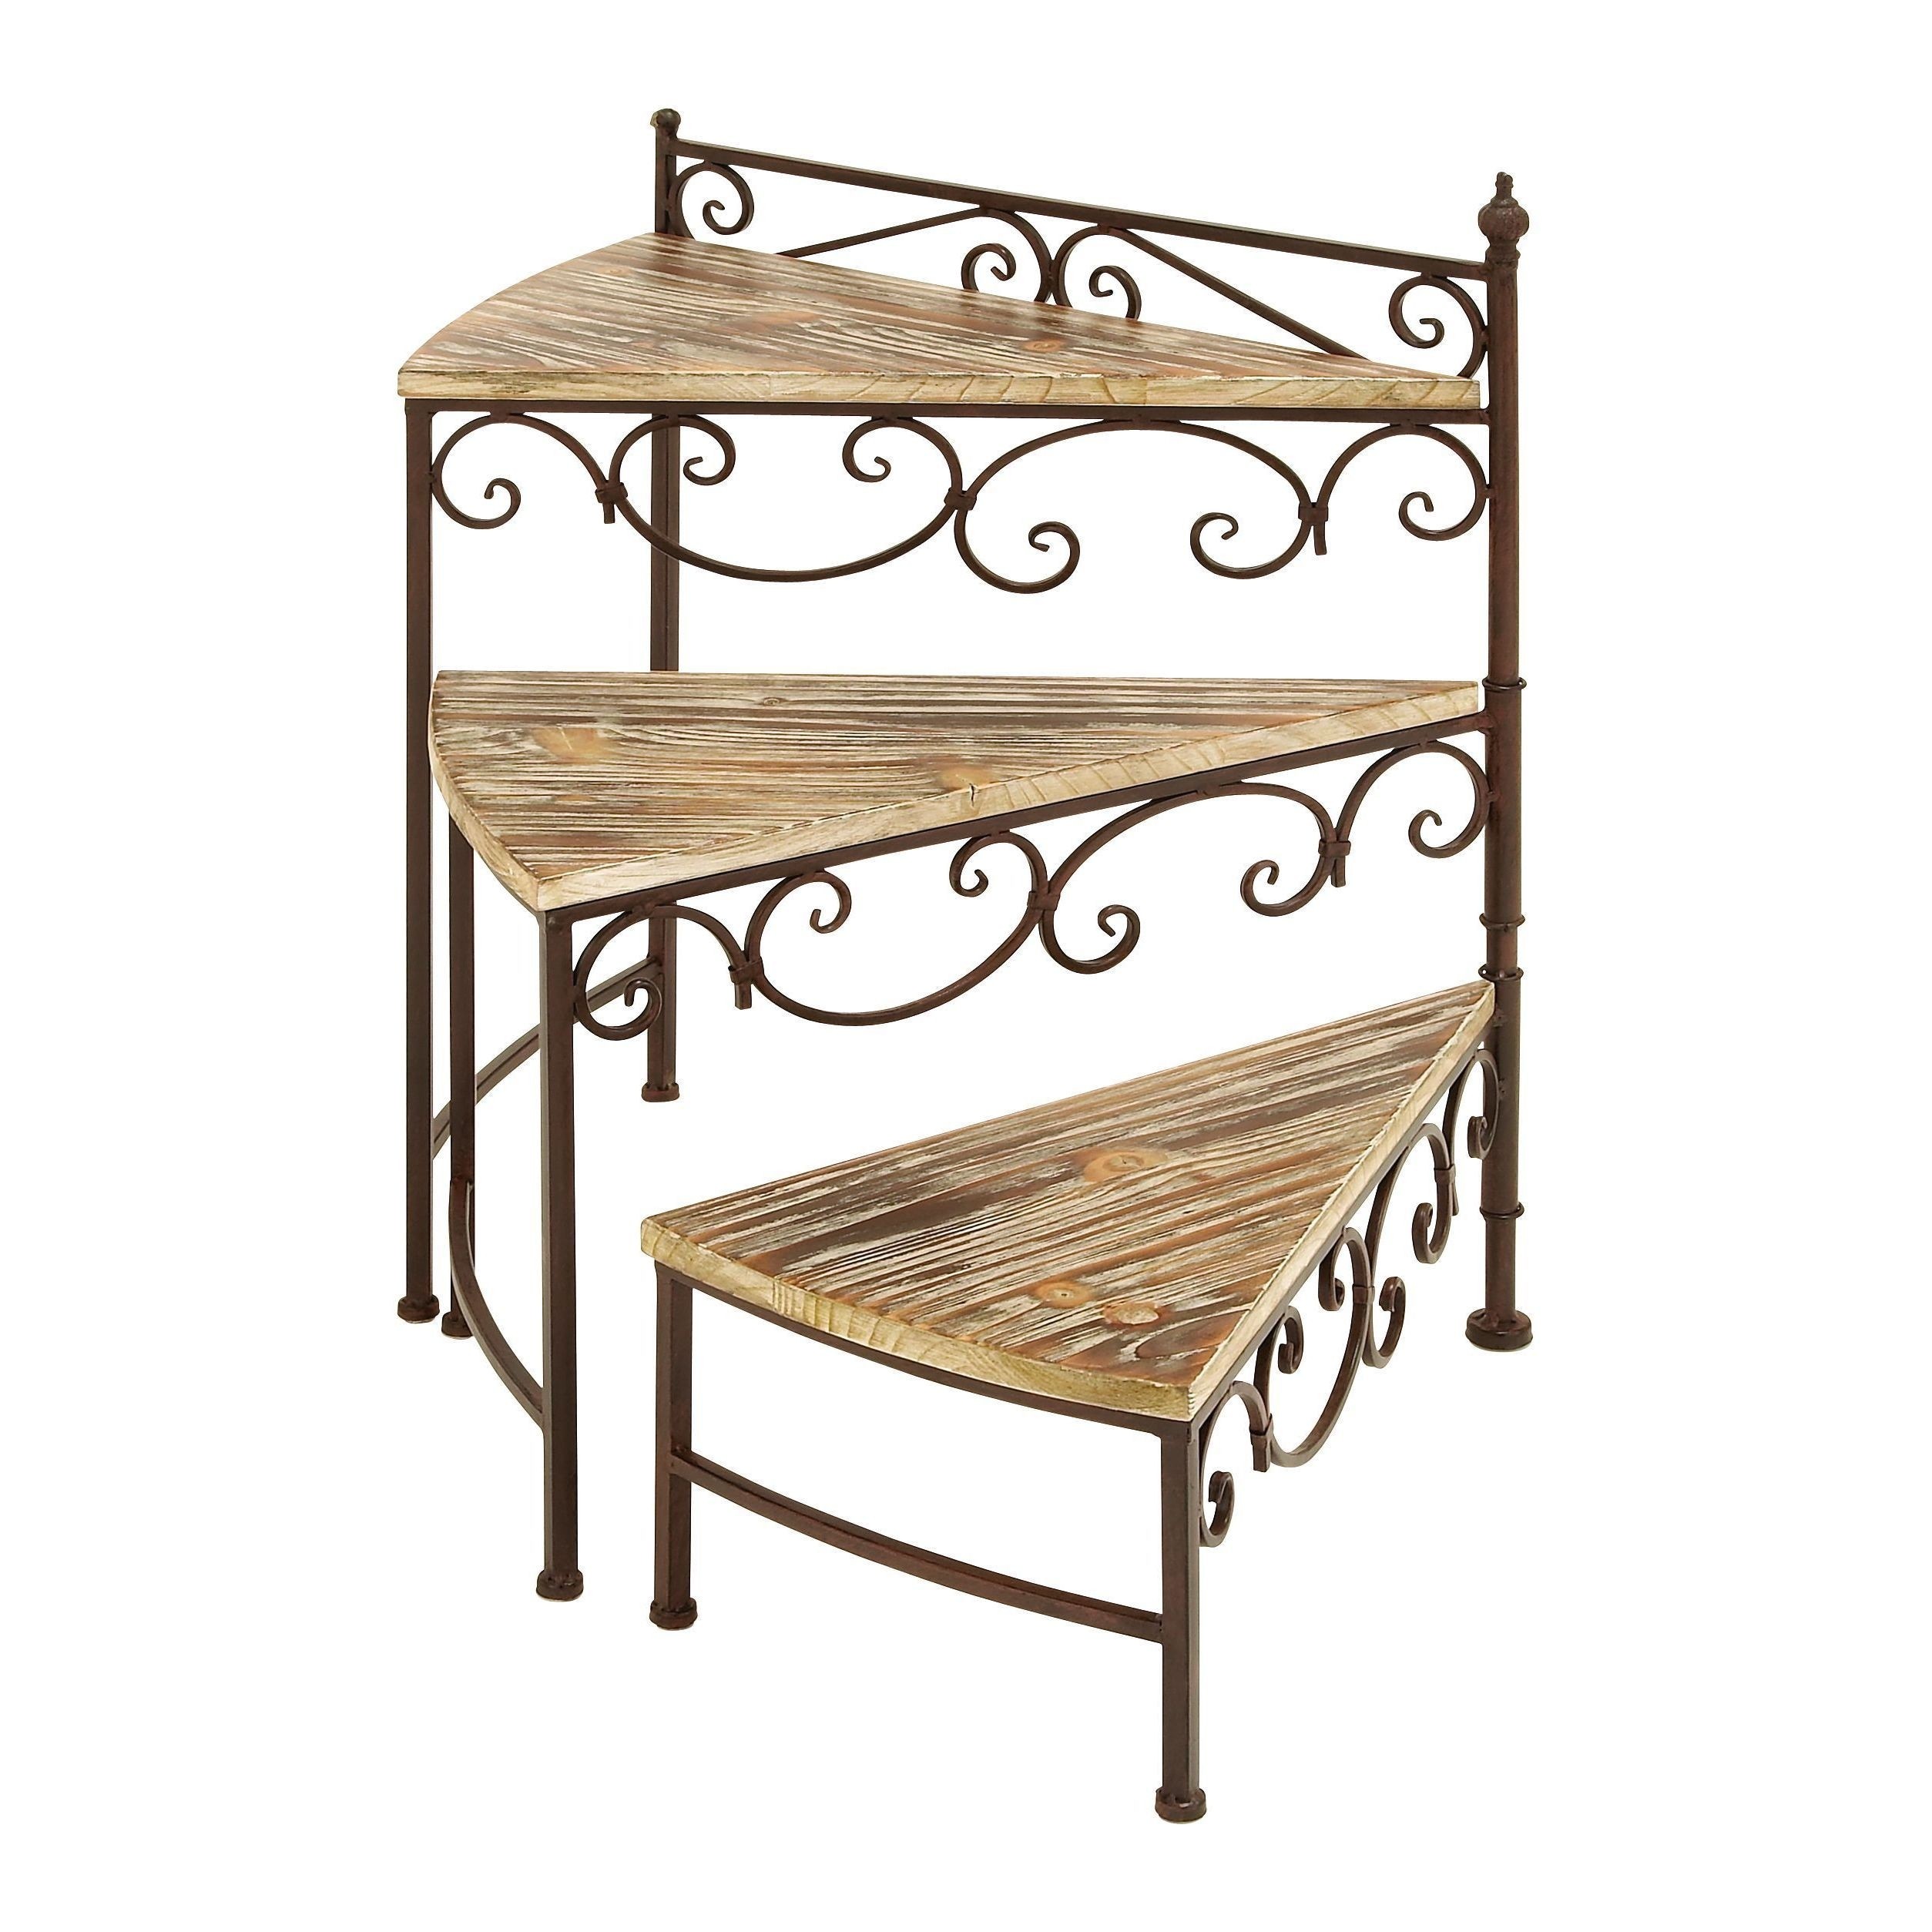 Deco 79 66552 Metal/Wood Rotating Stair Step Planter Stand, 22 by 26-Inch